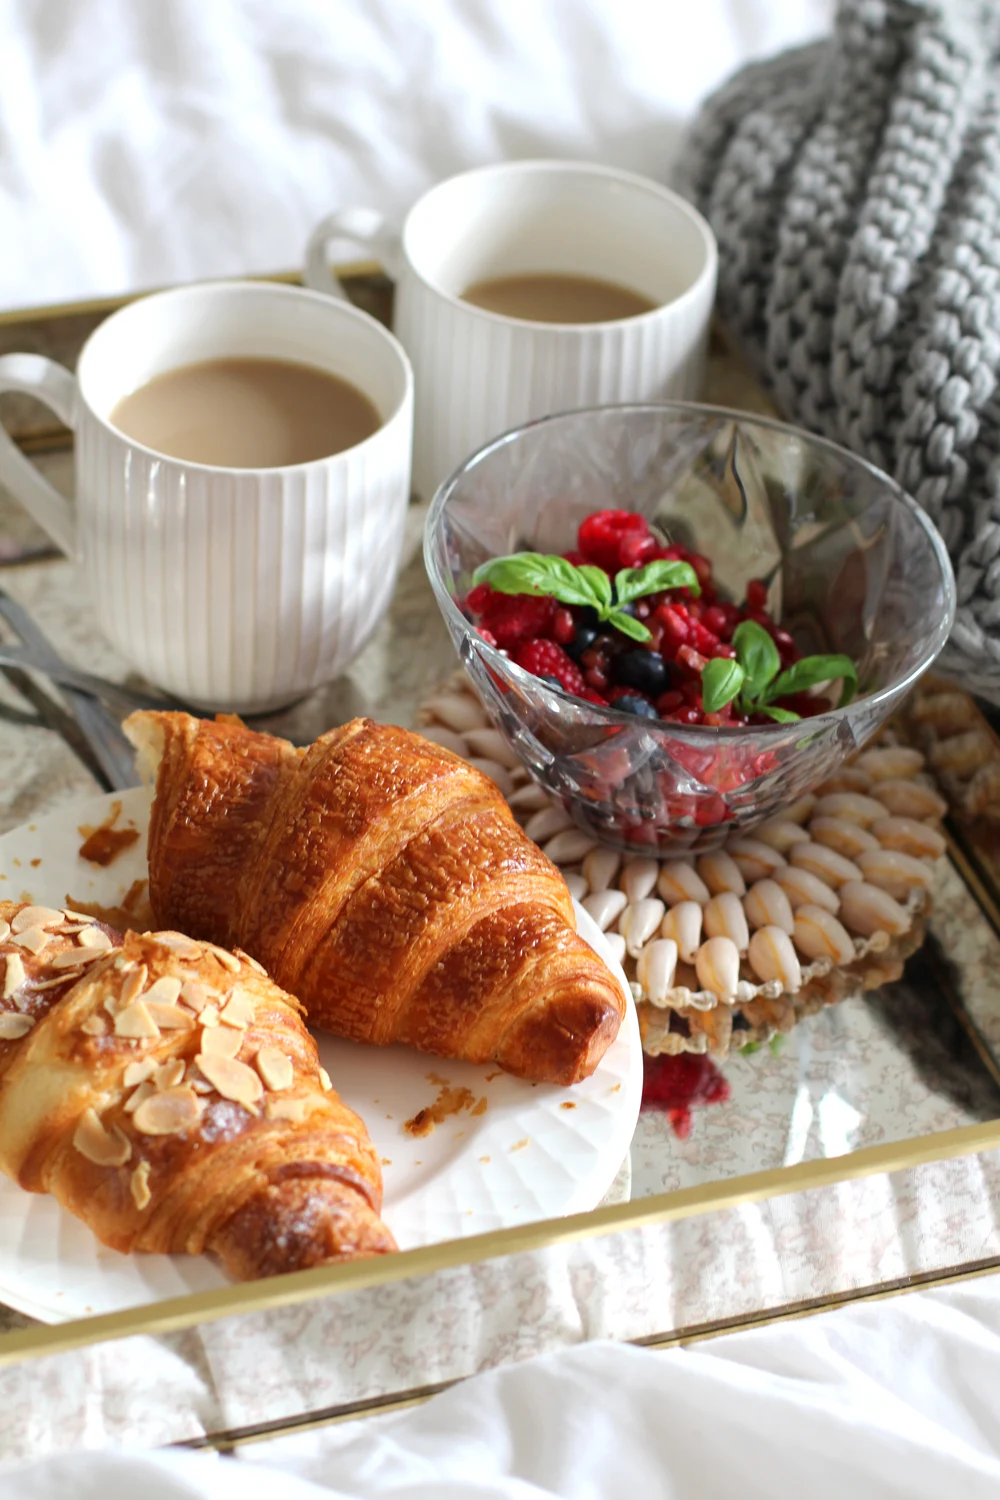 Breakfast in bed - UK lifestyle & interiors blog